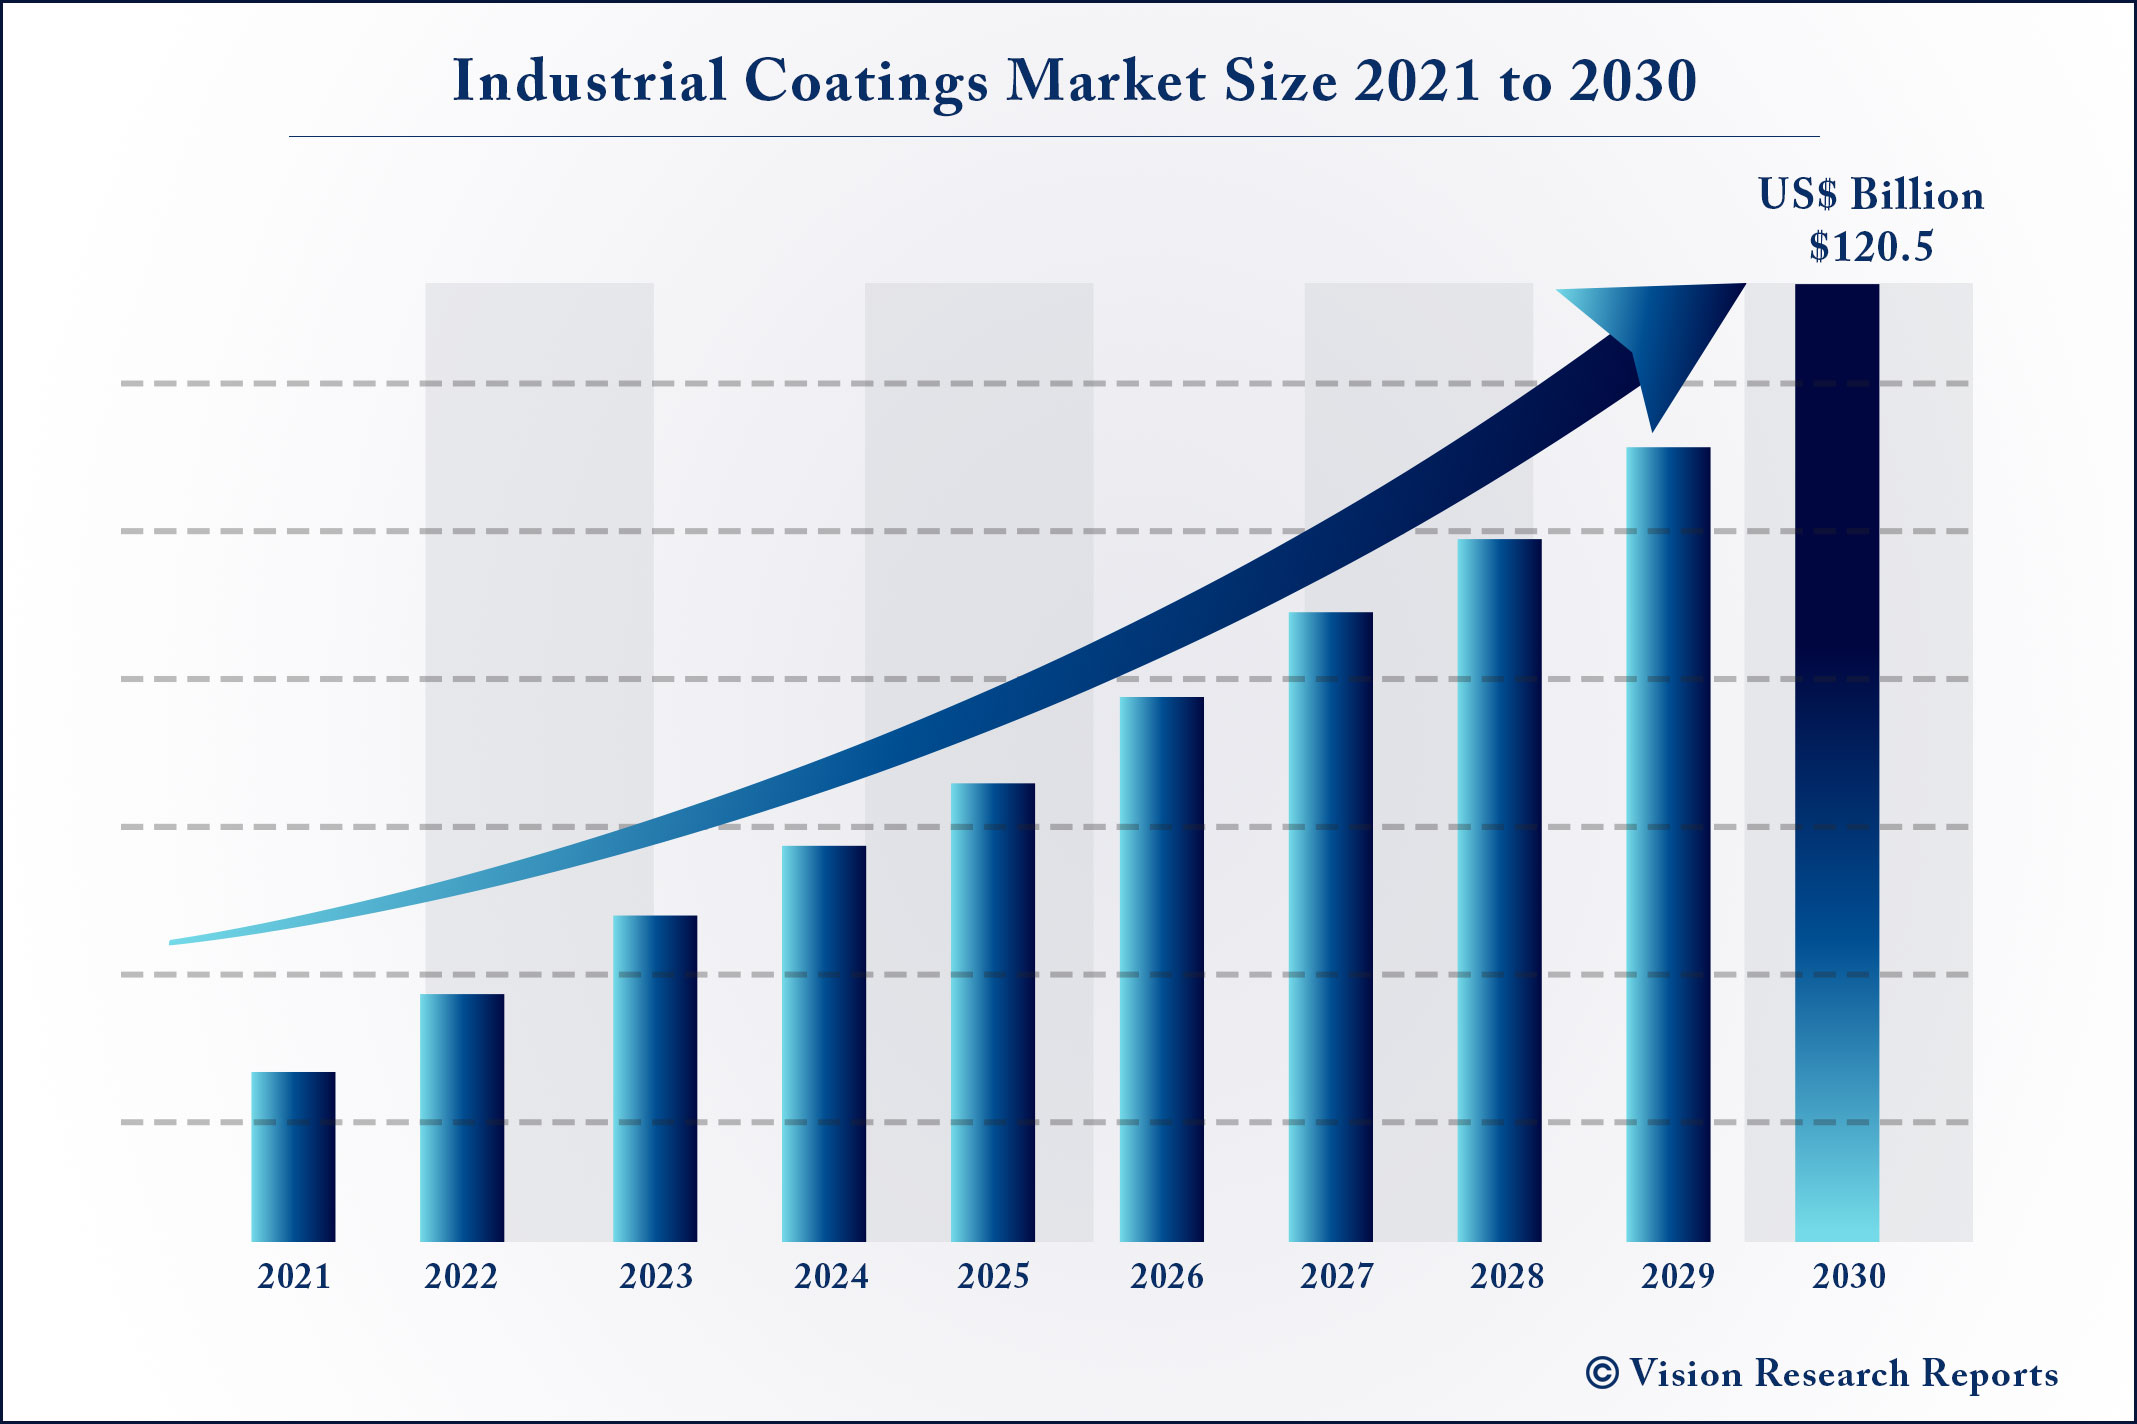 Industrial Coatings Market Size 2021 to 2030